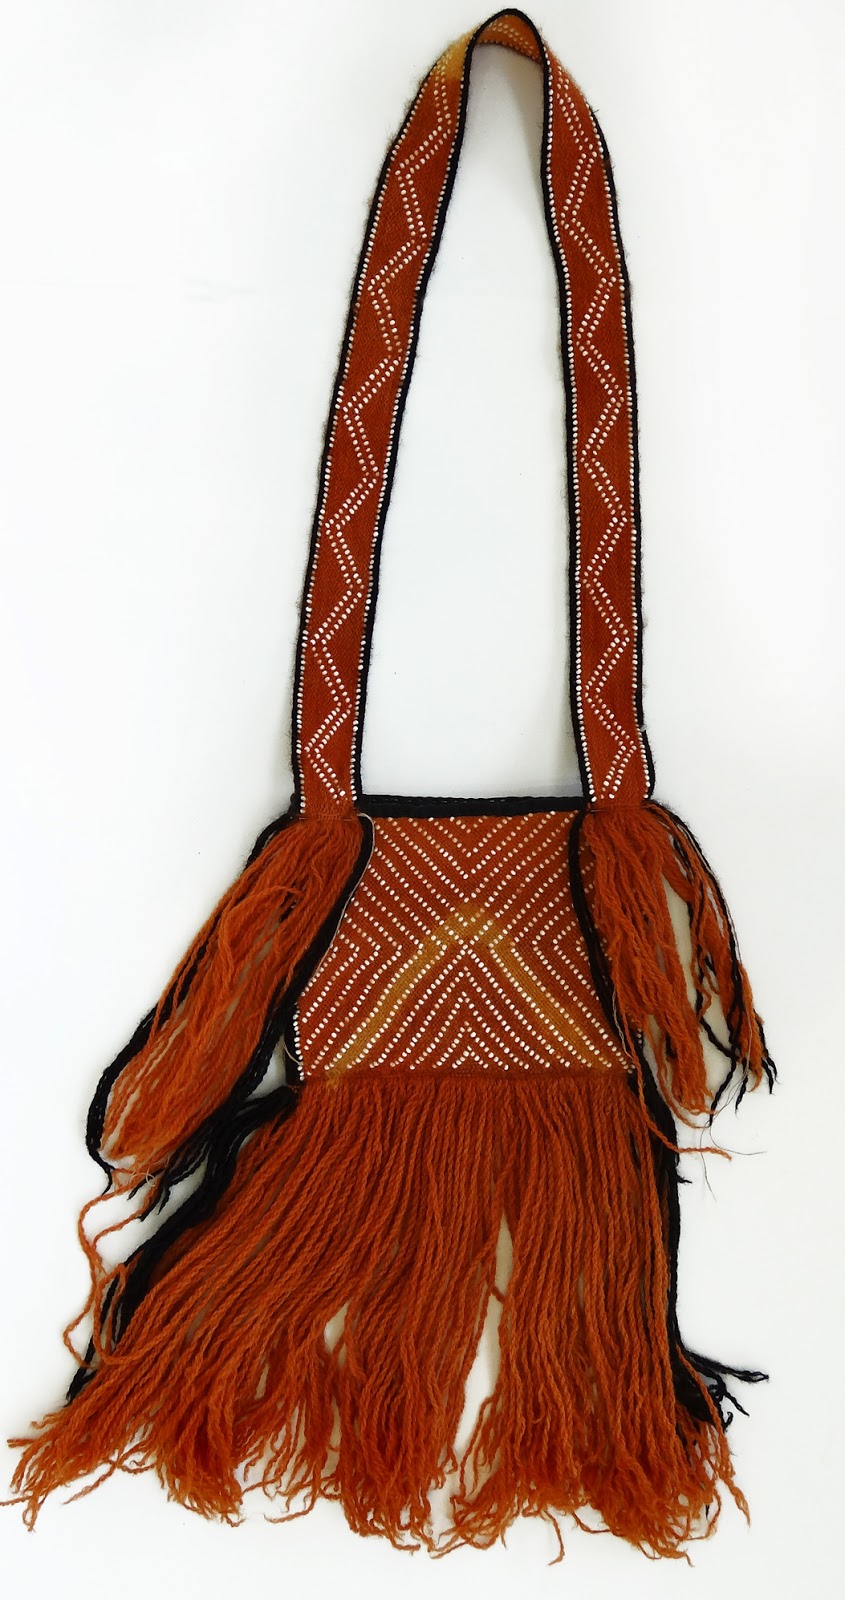 Contemporary Makers: Fingerwoven Bag by Alec Fourman